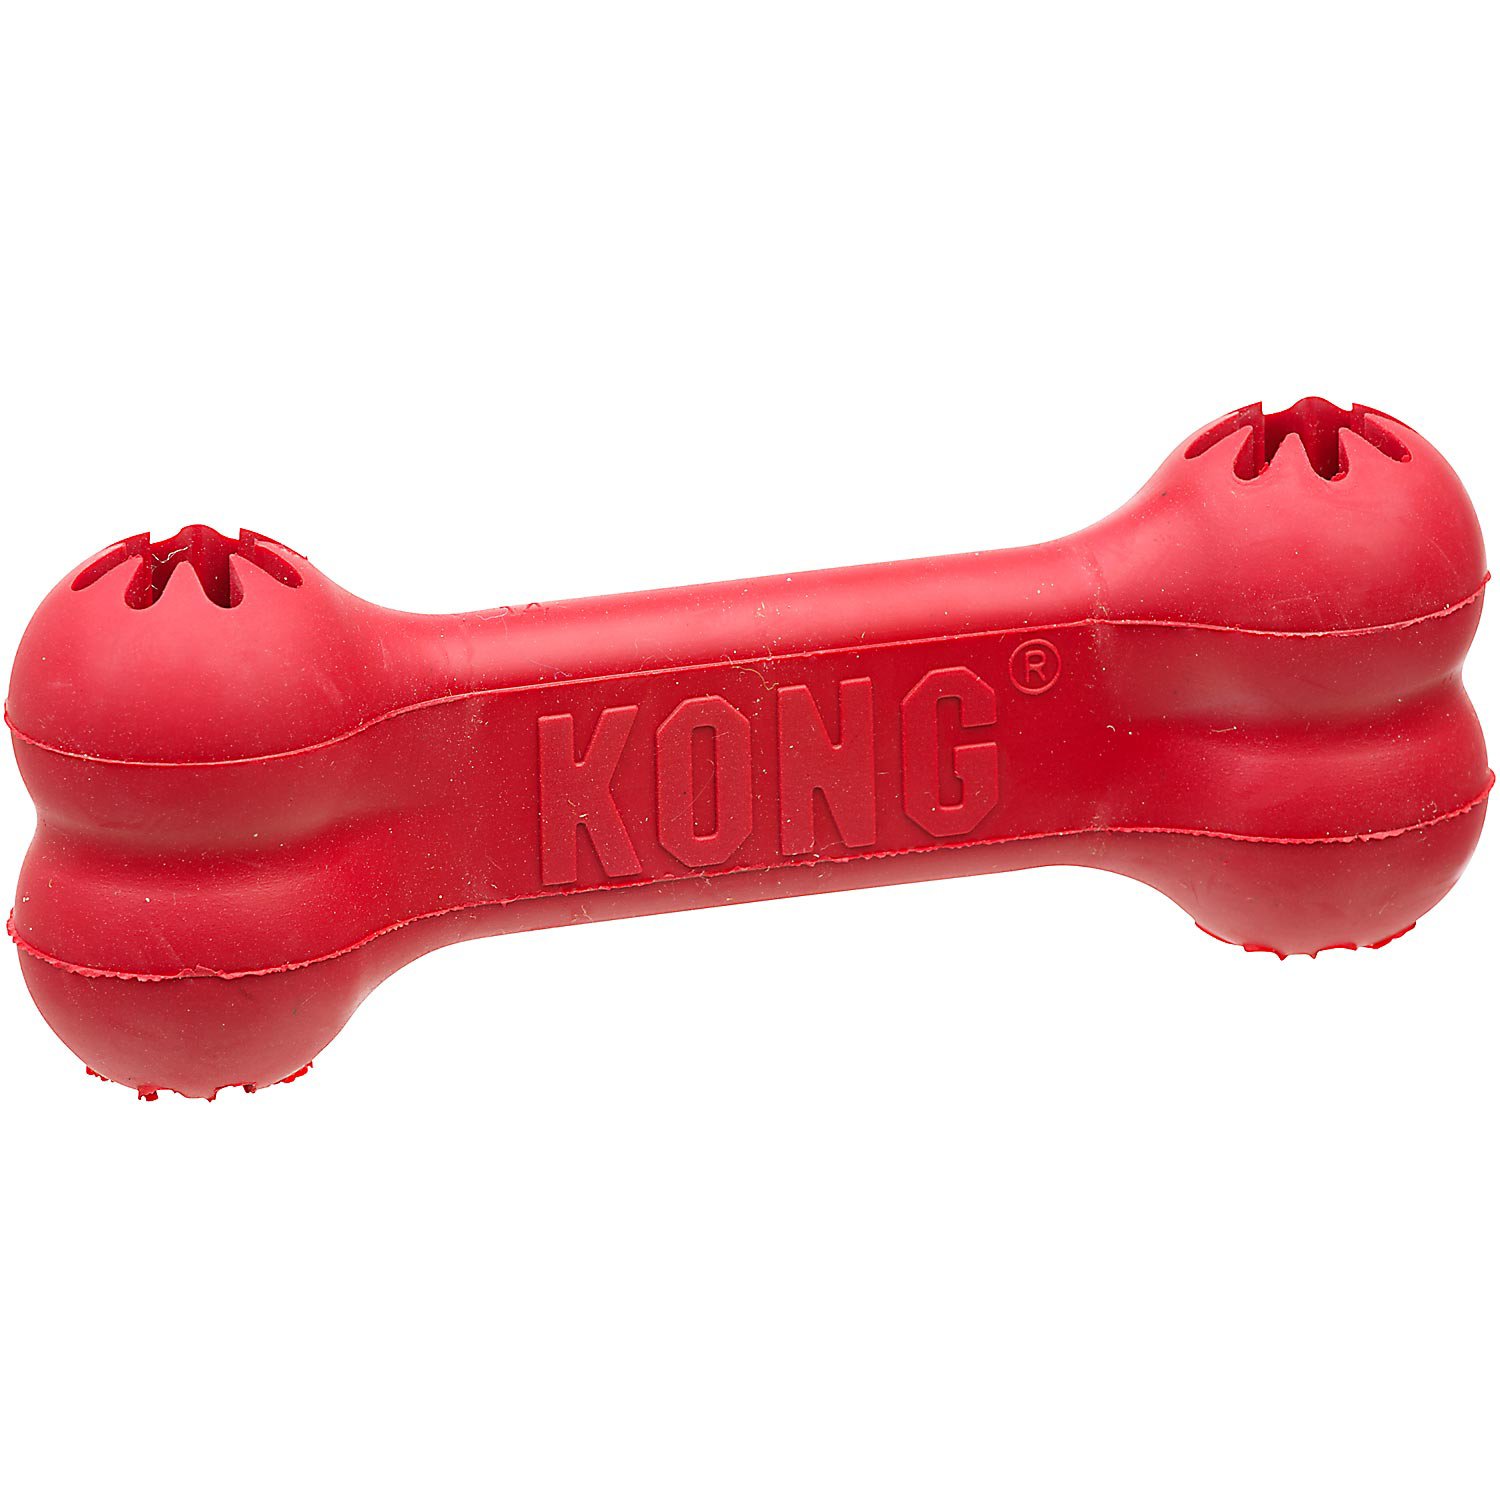 Kong Goodie Bone Toy For Dogs Petco